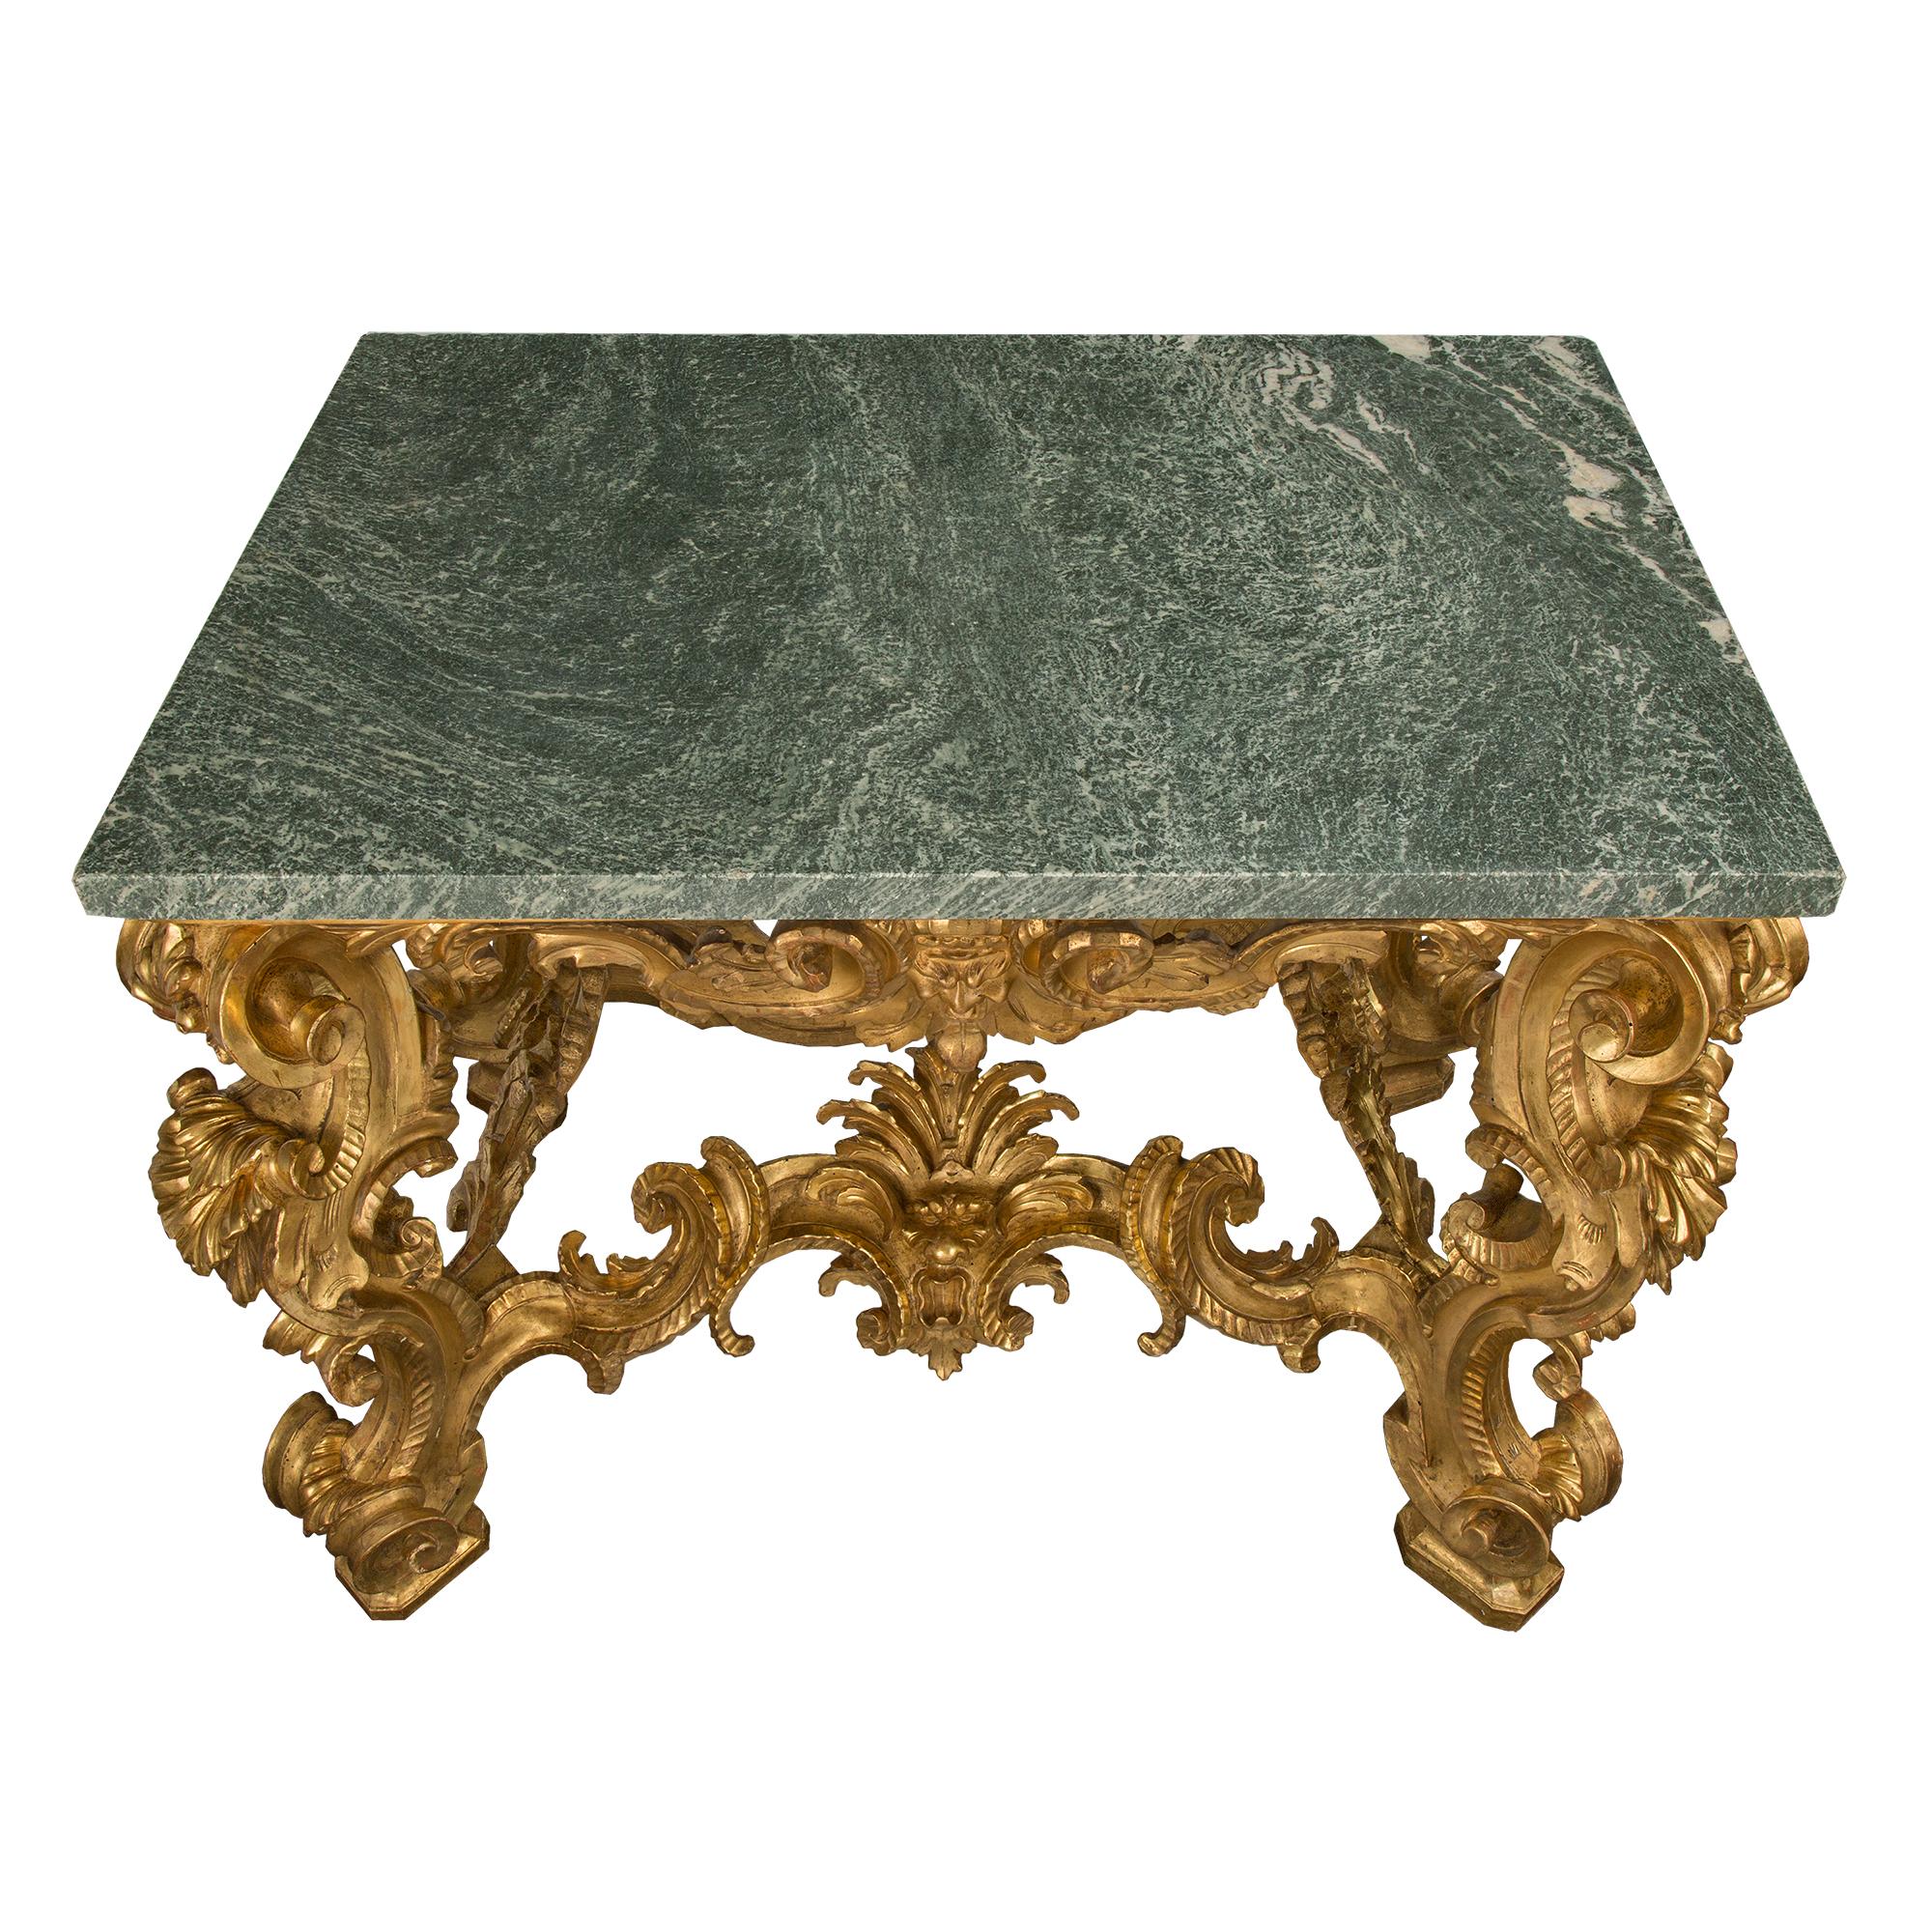 Italian Early 18th Century Louis XIV Period Freestanding Console In Good Condition For Sale In West Palm Beach, FL